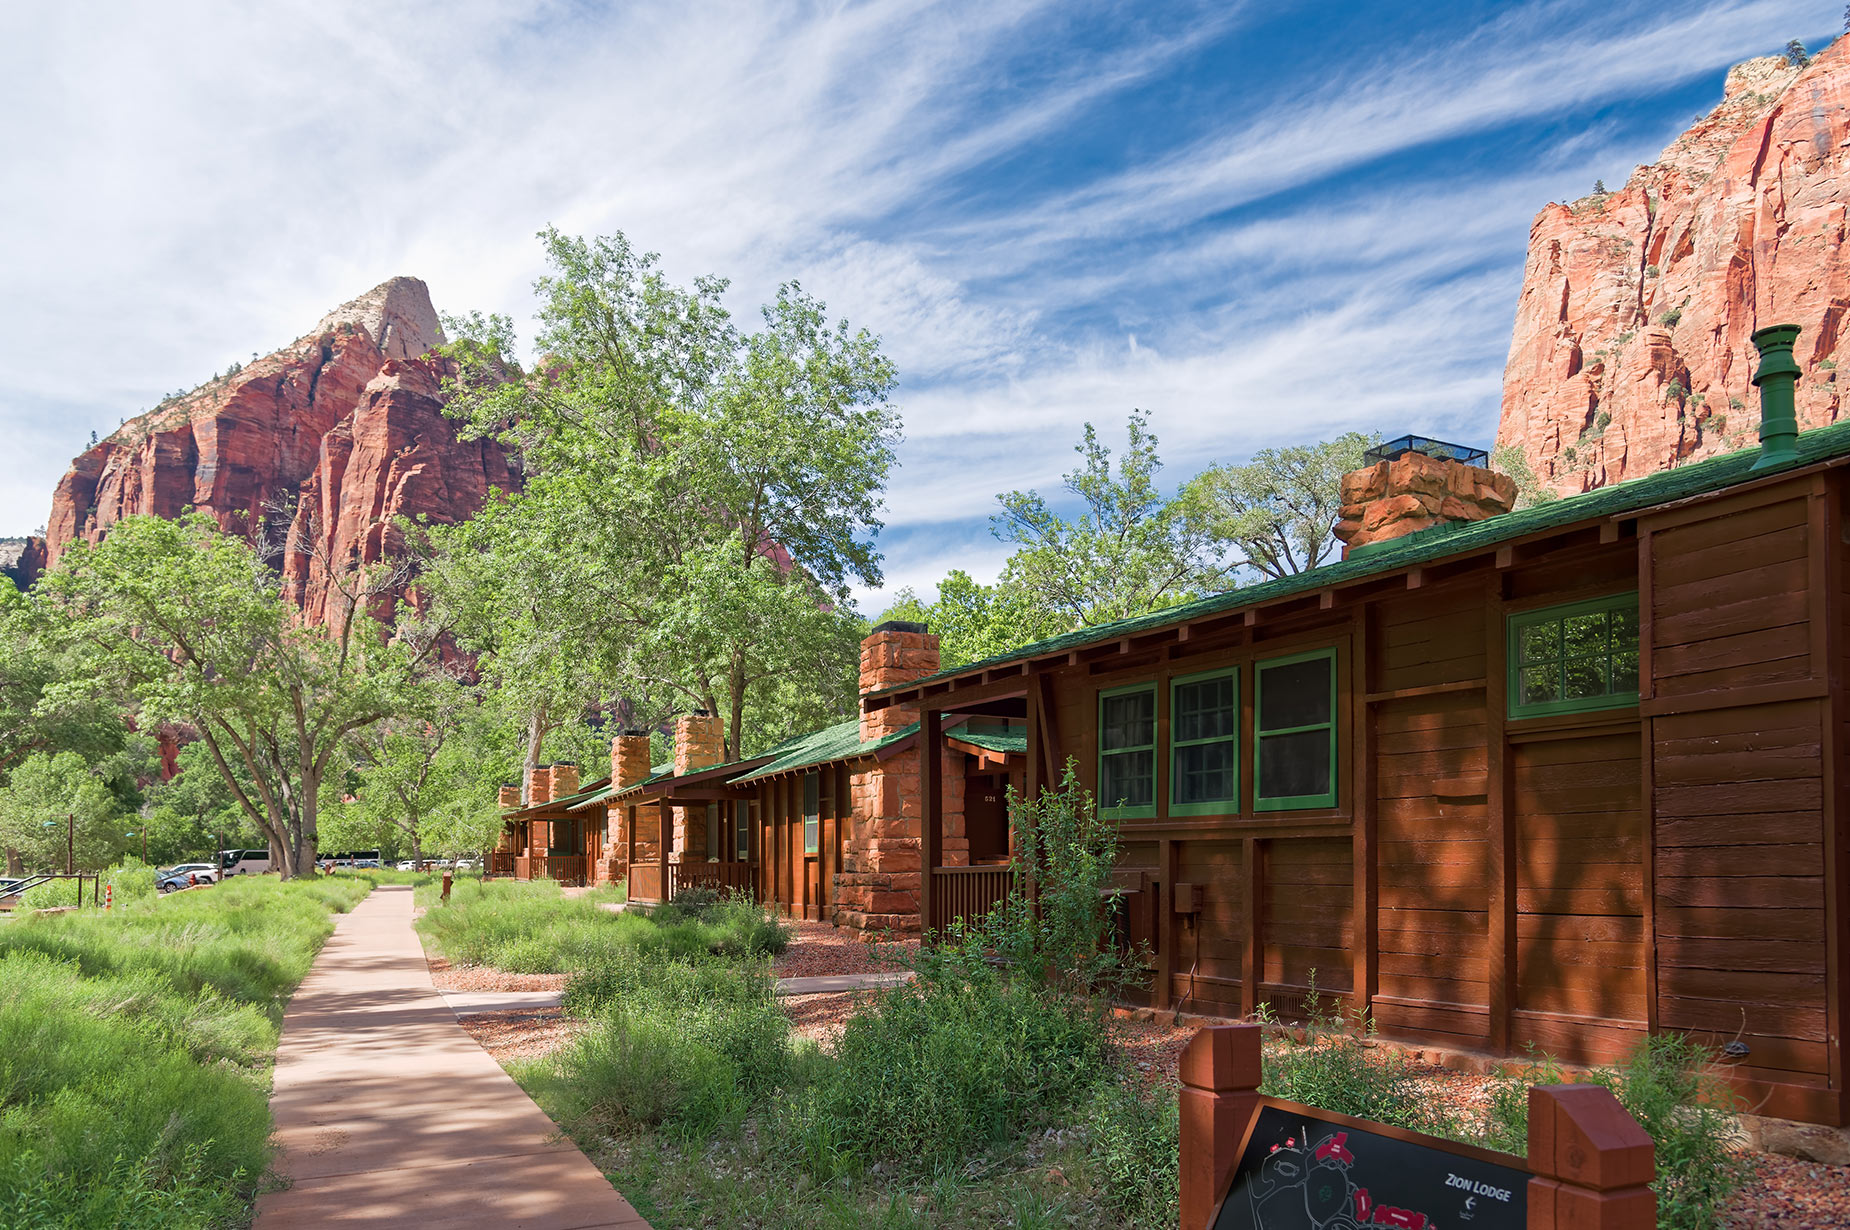 Zion Lodge in Zion National Park